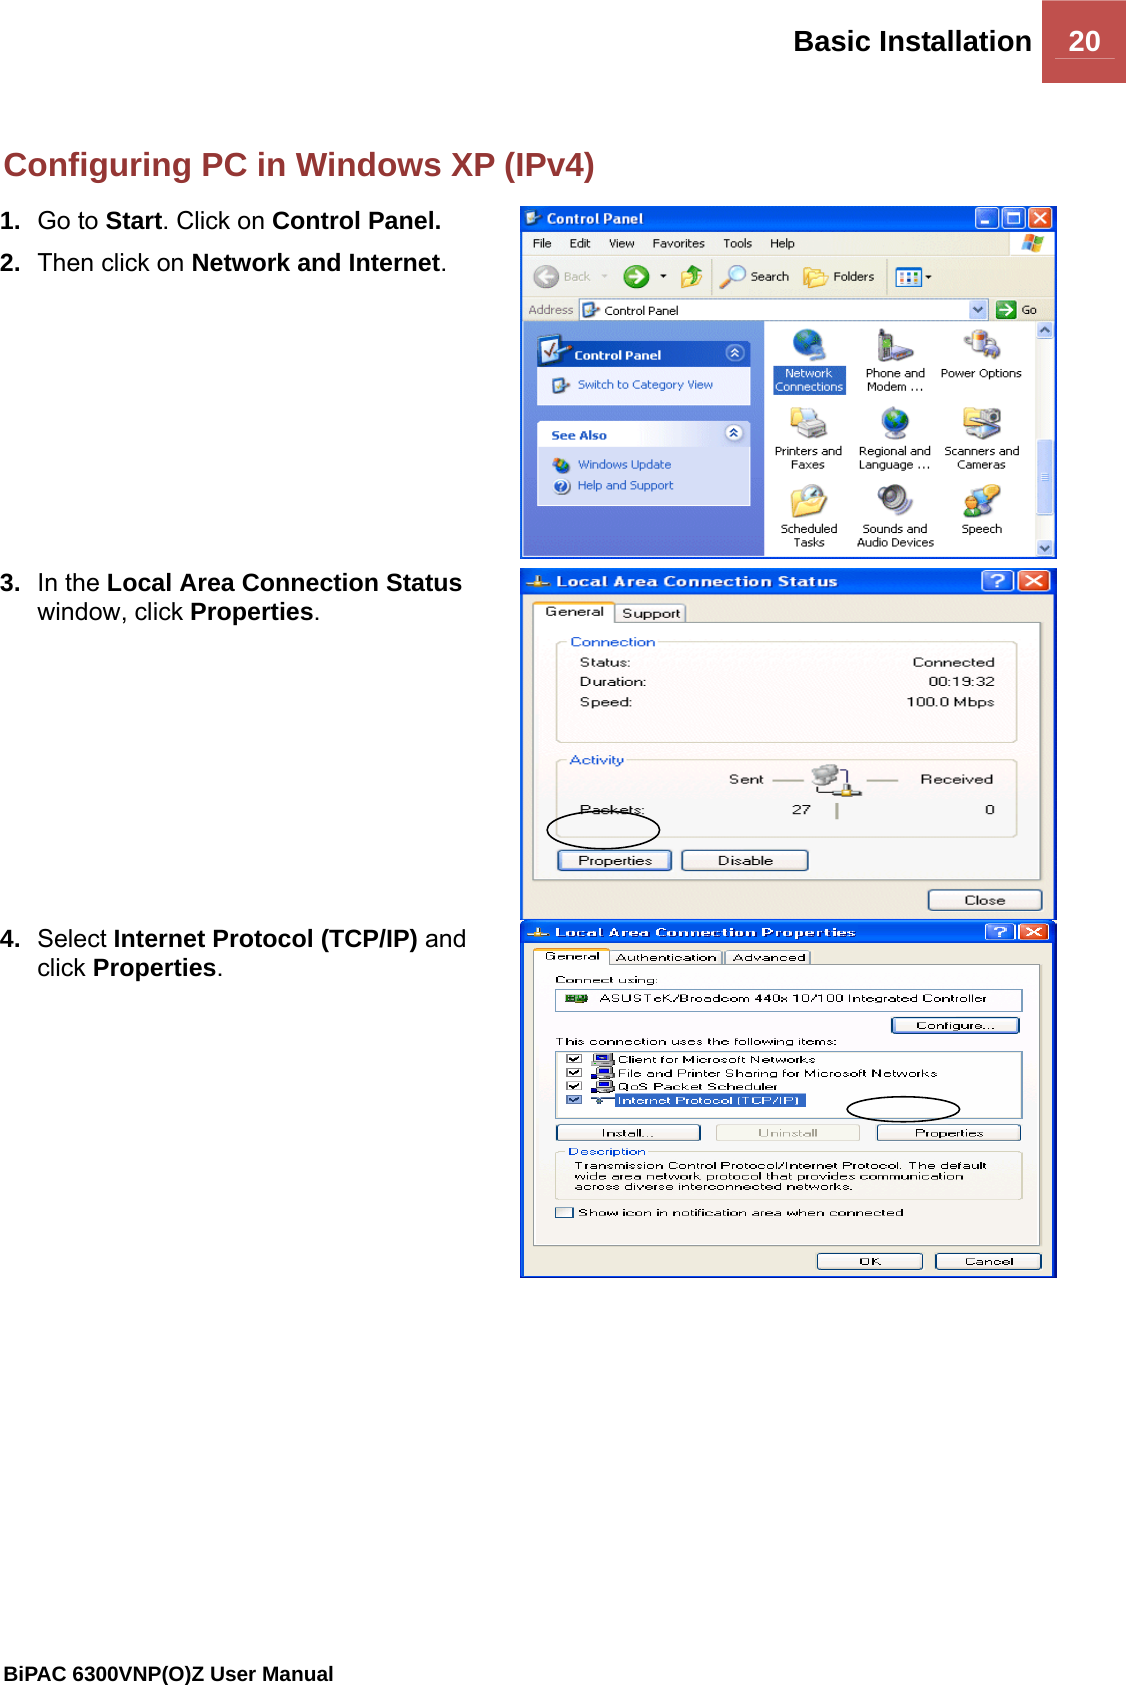 Basic Installation 20                                                BiPAC 6300VNP(O)Z User Manual   Configuring PC in Windows XP (IPv4) 1.  Go to Start. Click on Control Panel. 2.  Then click on Network and Internet.   3.  In the Local Area Connection Status window, click Properties.  4.  Select Internet Protocol (TCP/IP) and click Properties.  